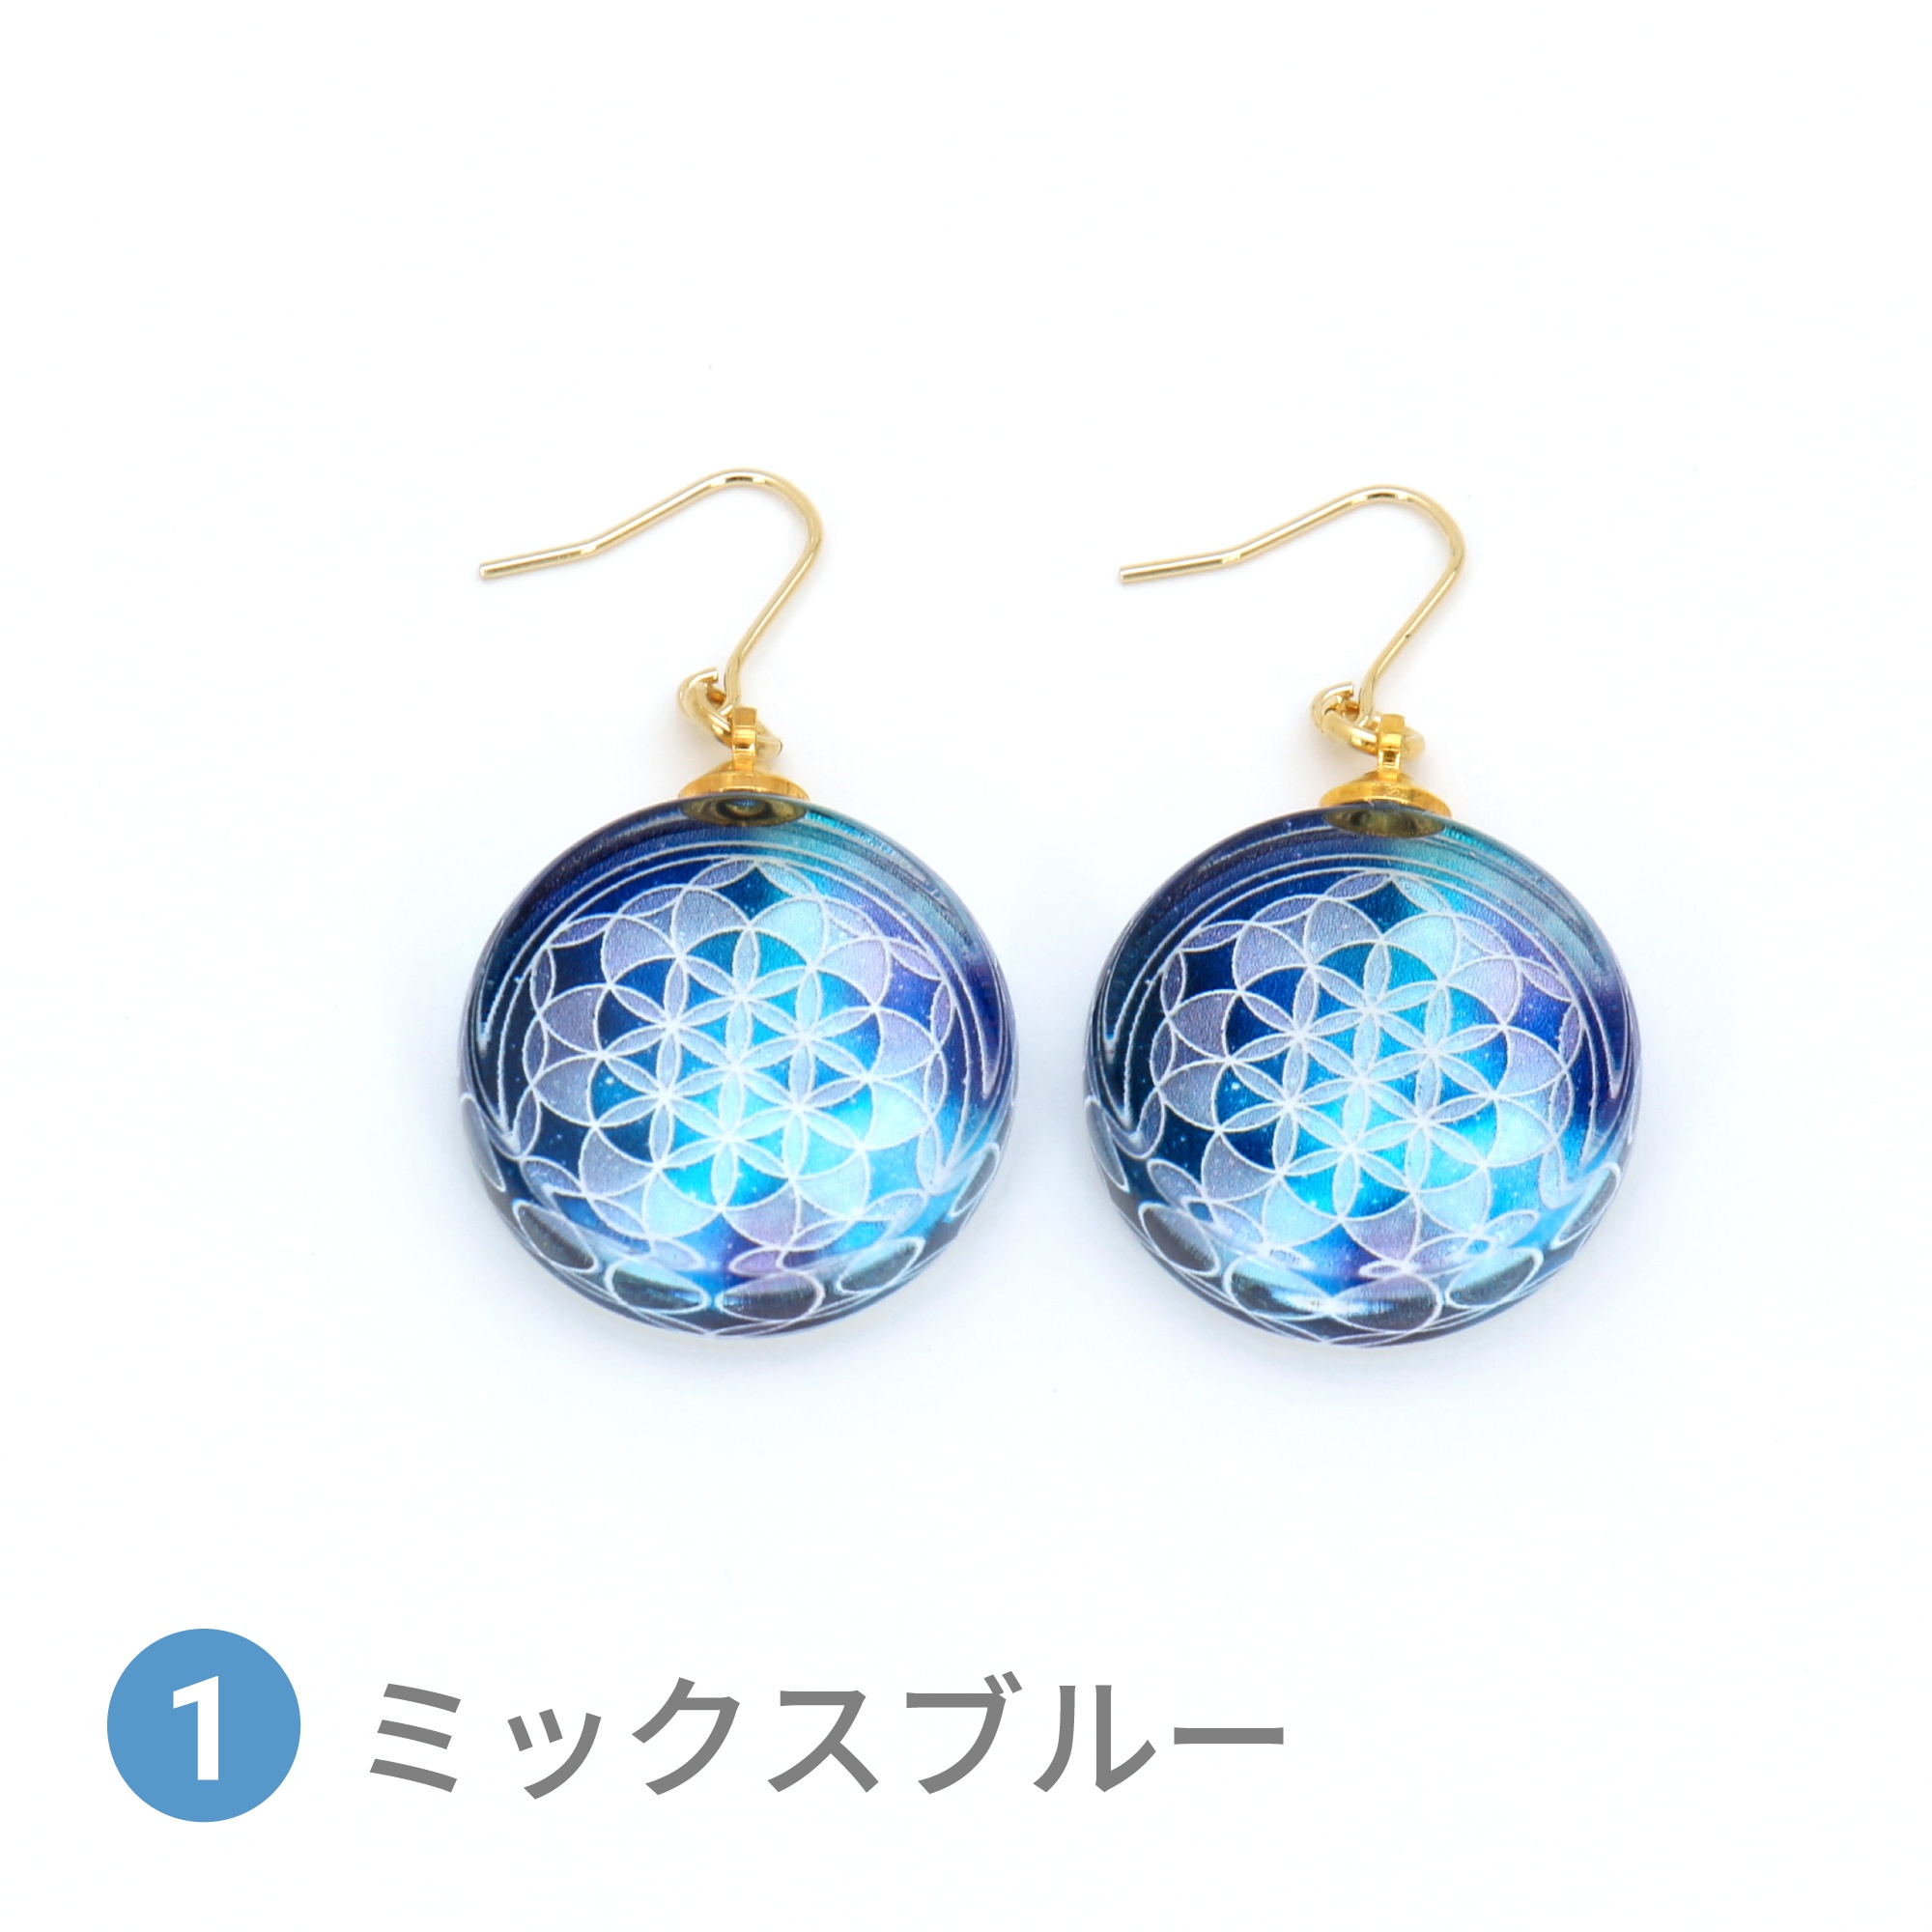 Glass accessories Pierced Earring FLOWER OF LIFE mix blue round shape